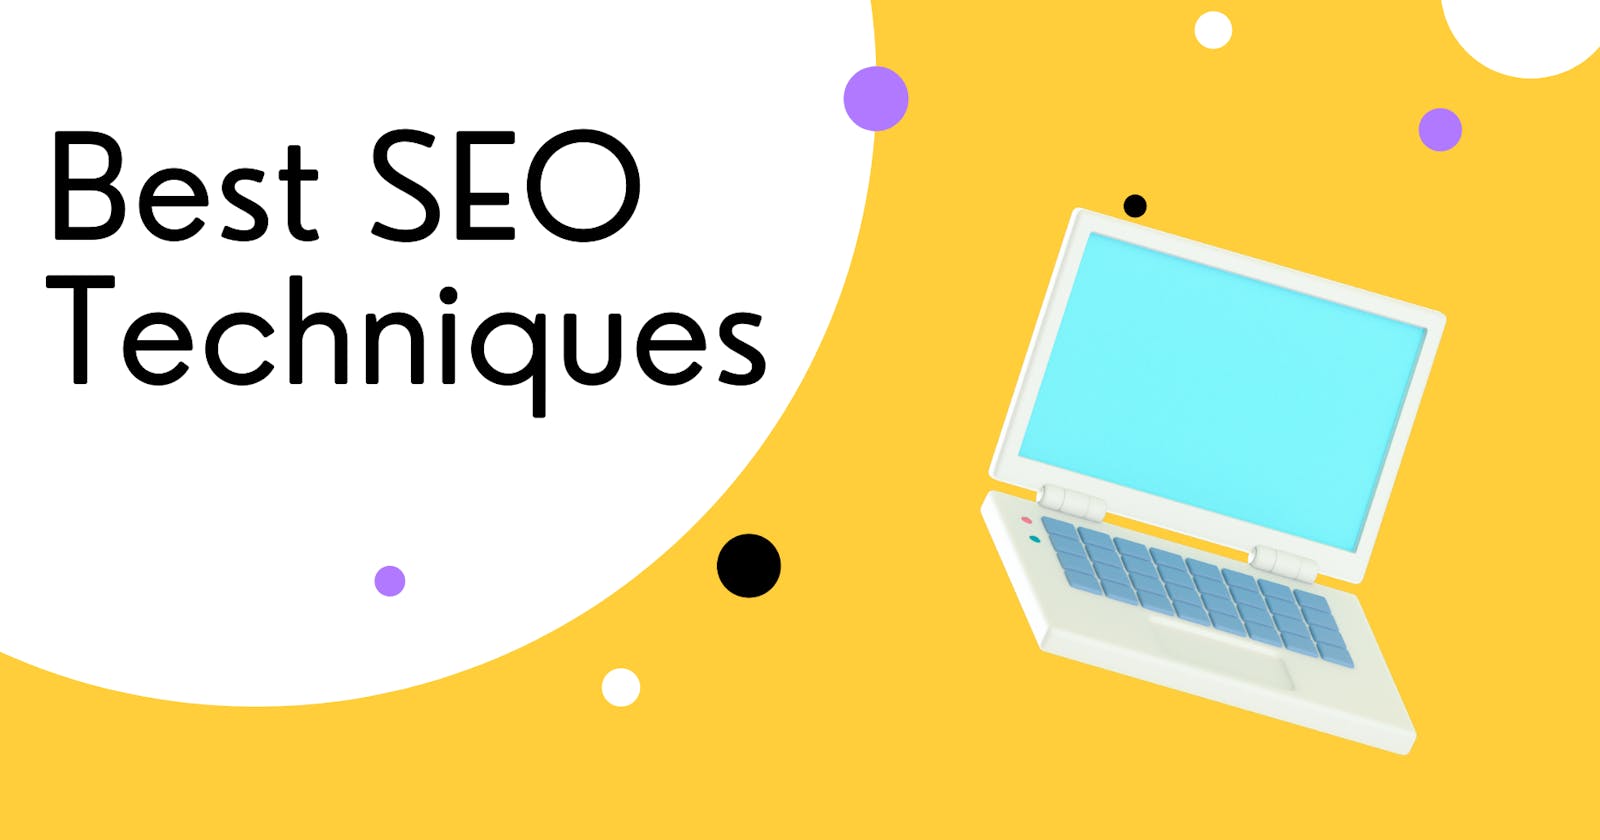 Best SEO Techniques to Increase Website Traffic quickly.